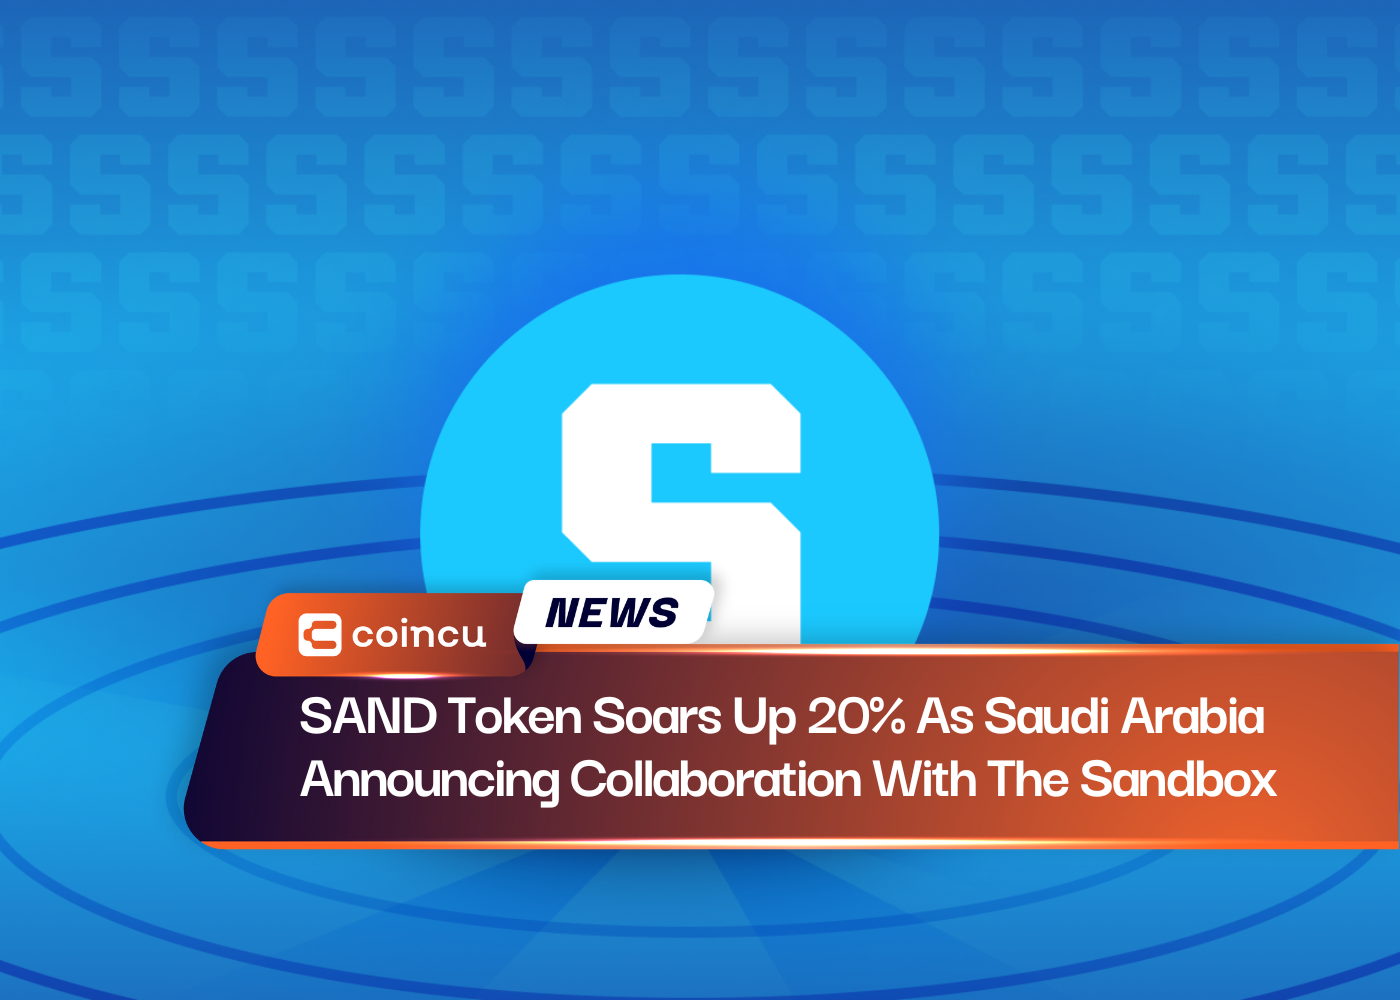 SAND Token Soars Up 20% As Saudi Arabia Announcing Collaboration With The Sandbox